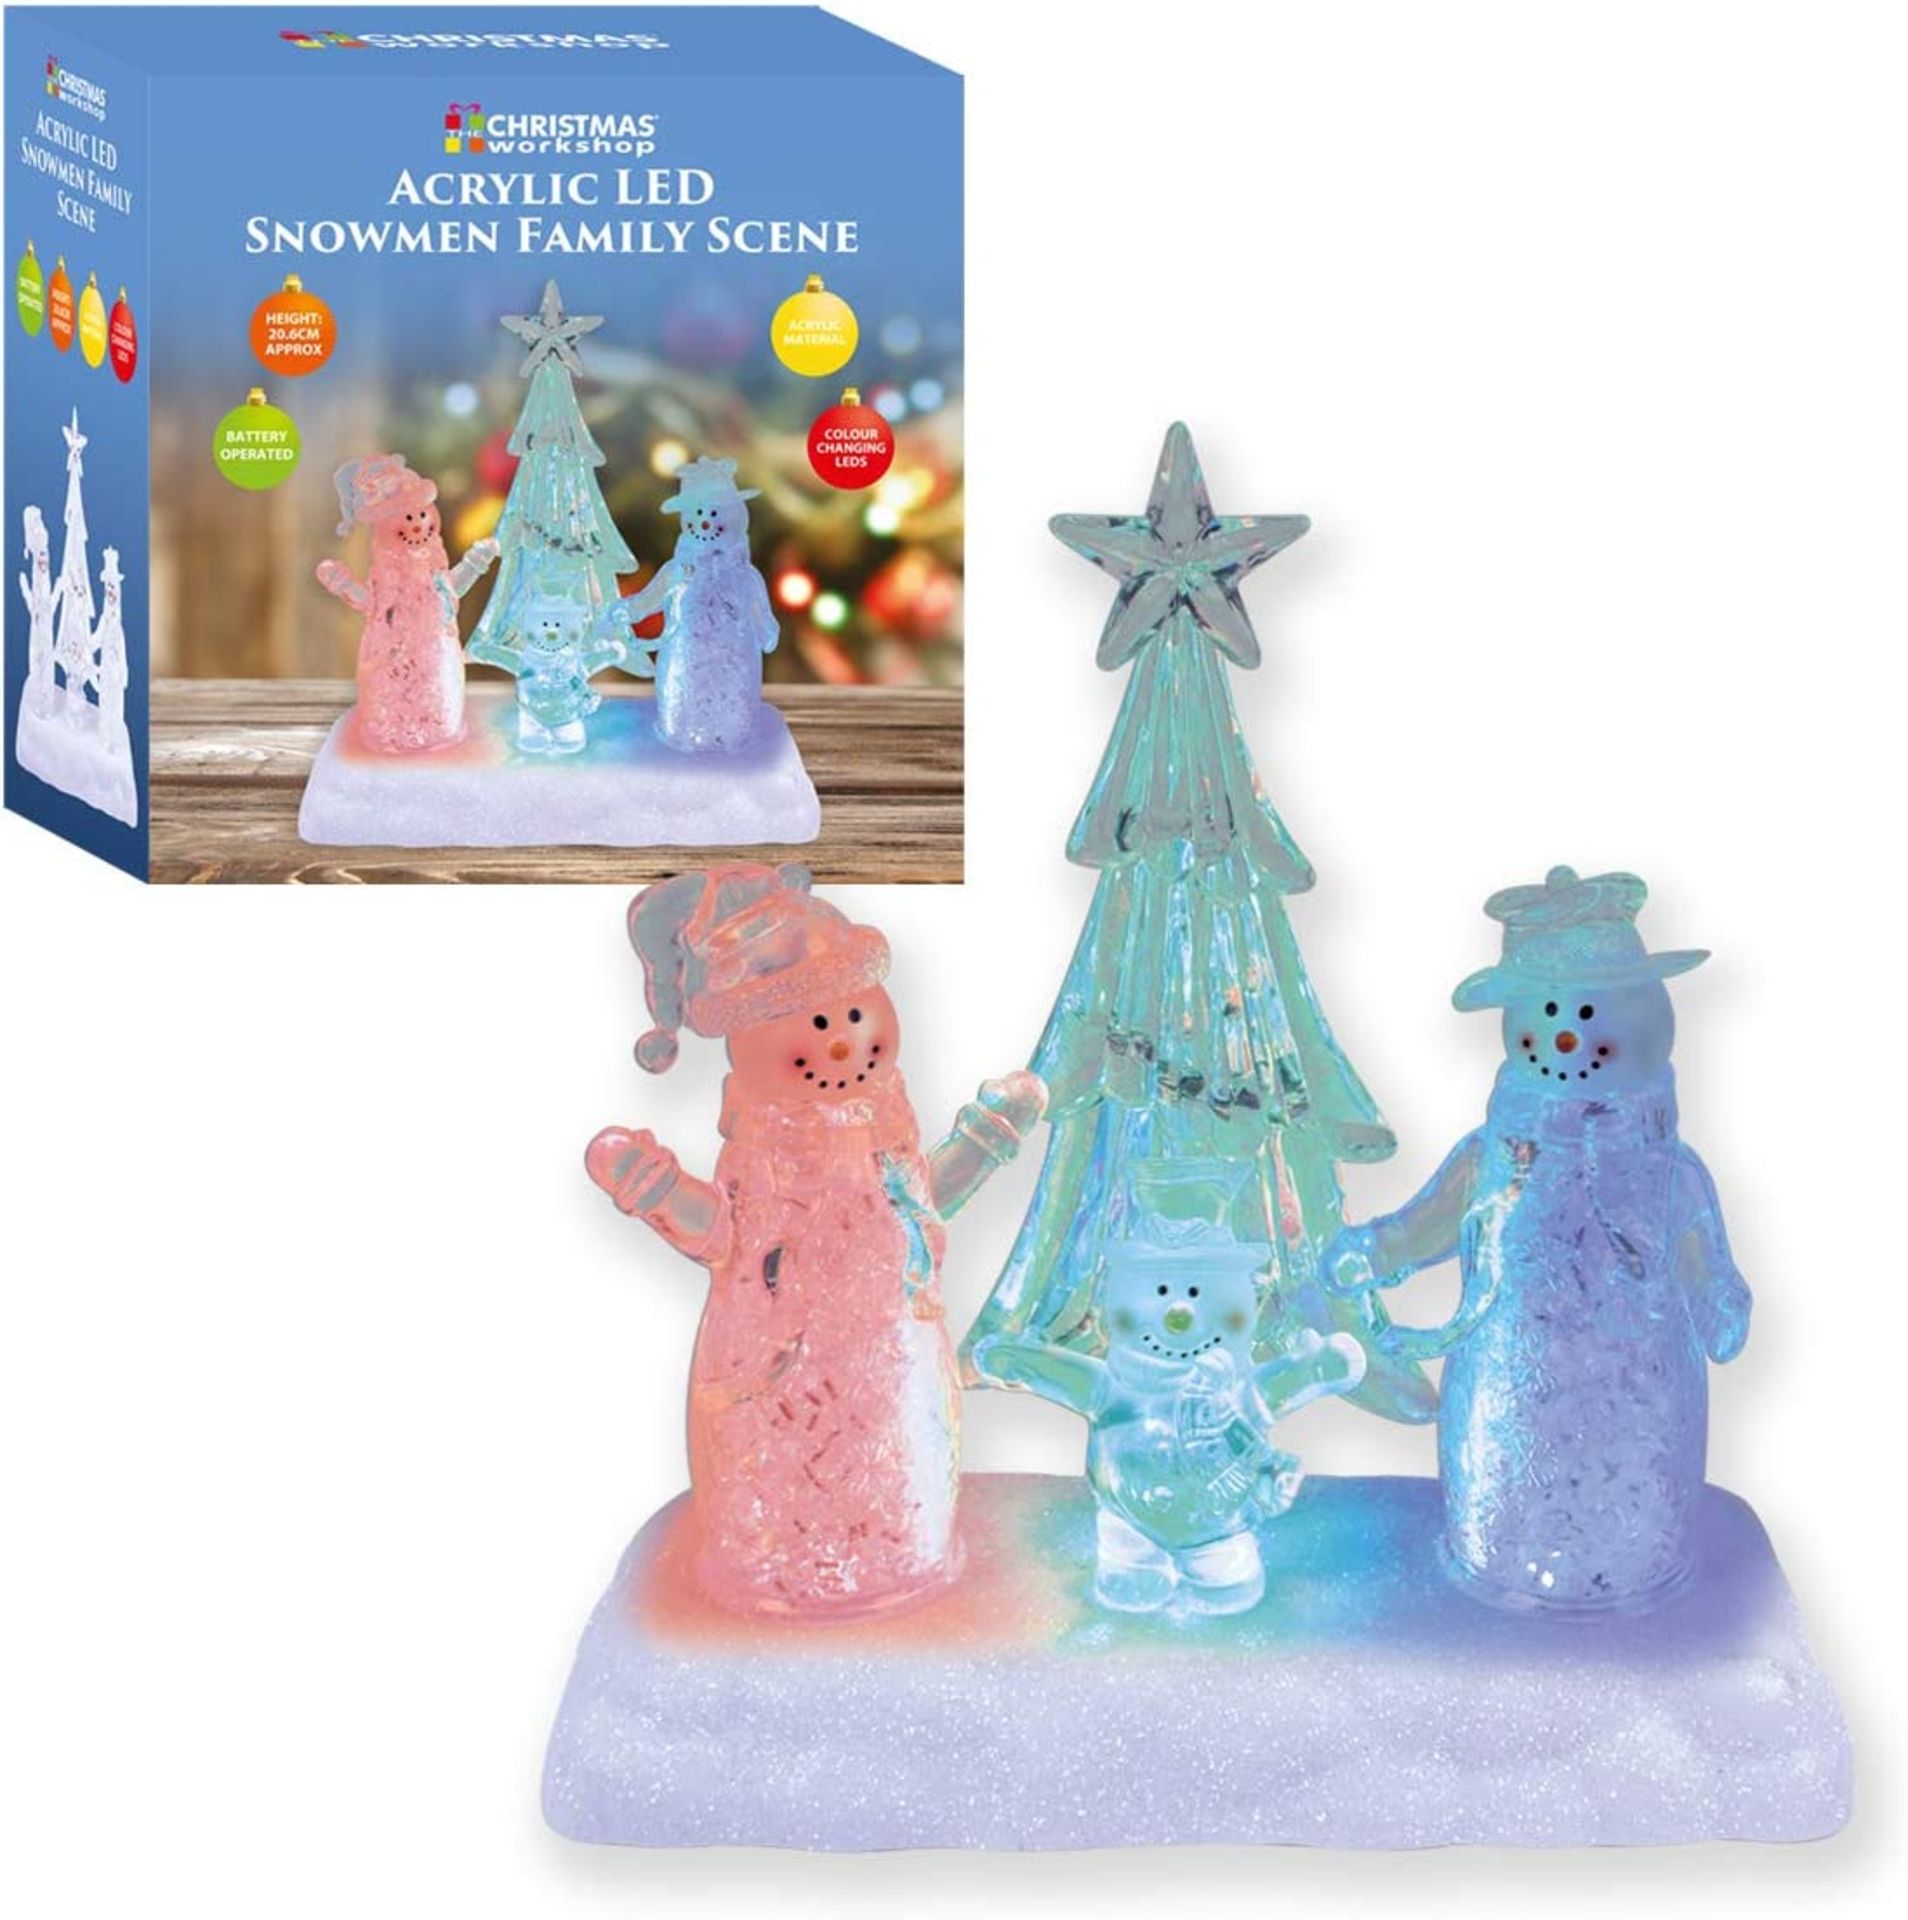 Christmas Workshop Acrylic Snowman Family Scene Colour Changing LED Lights - Image 2 of 3